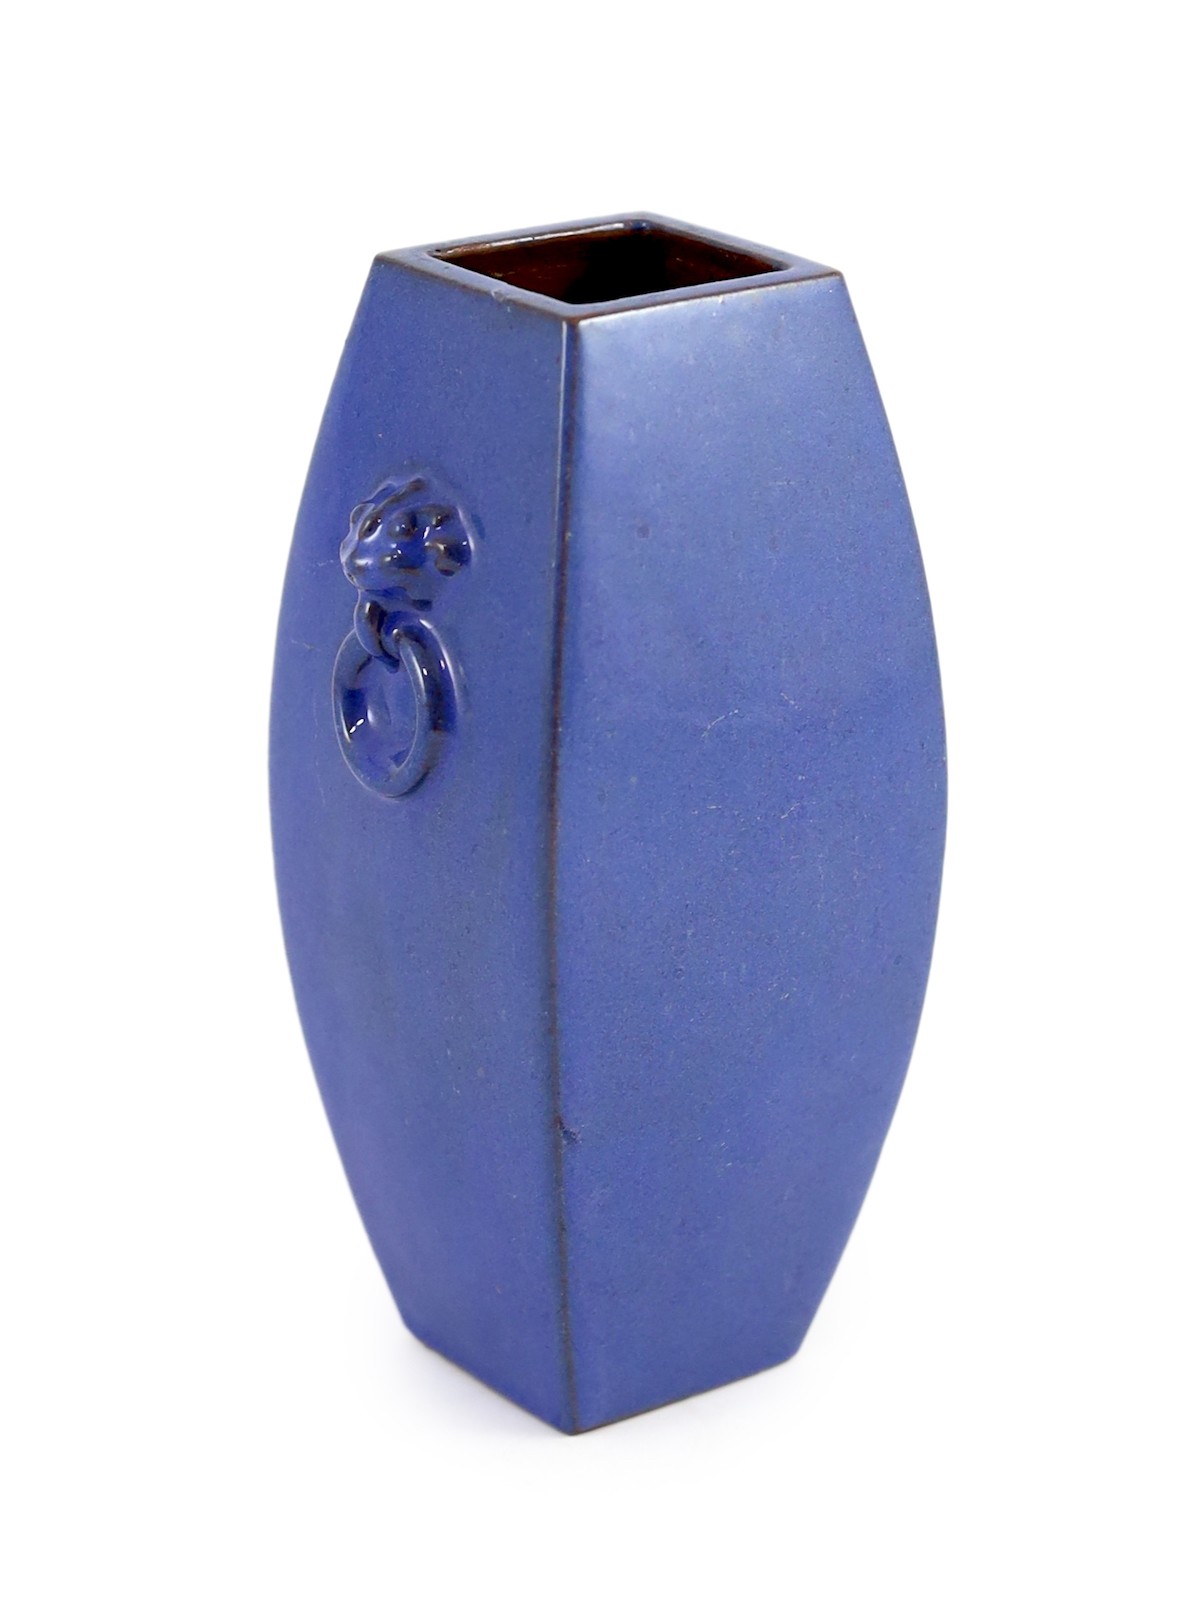 A Chinese Yixing blue glazed square vase, 19th/20th century, 16.2cm high